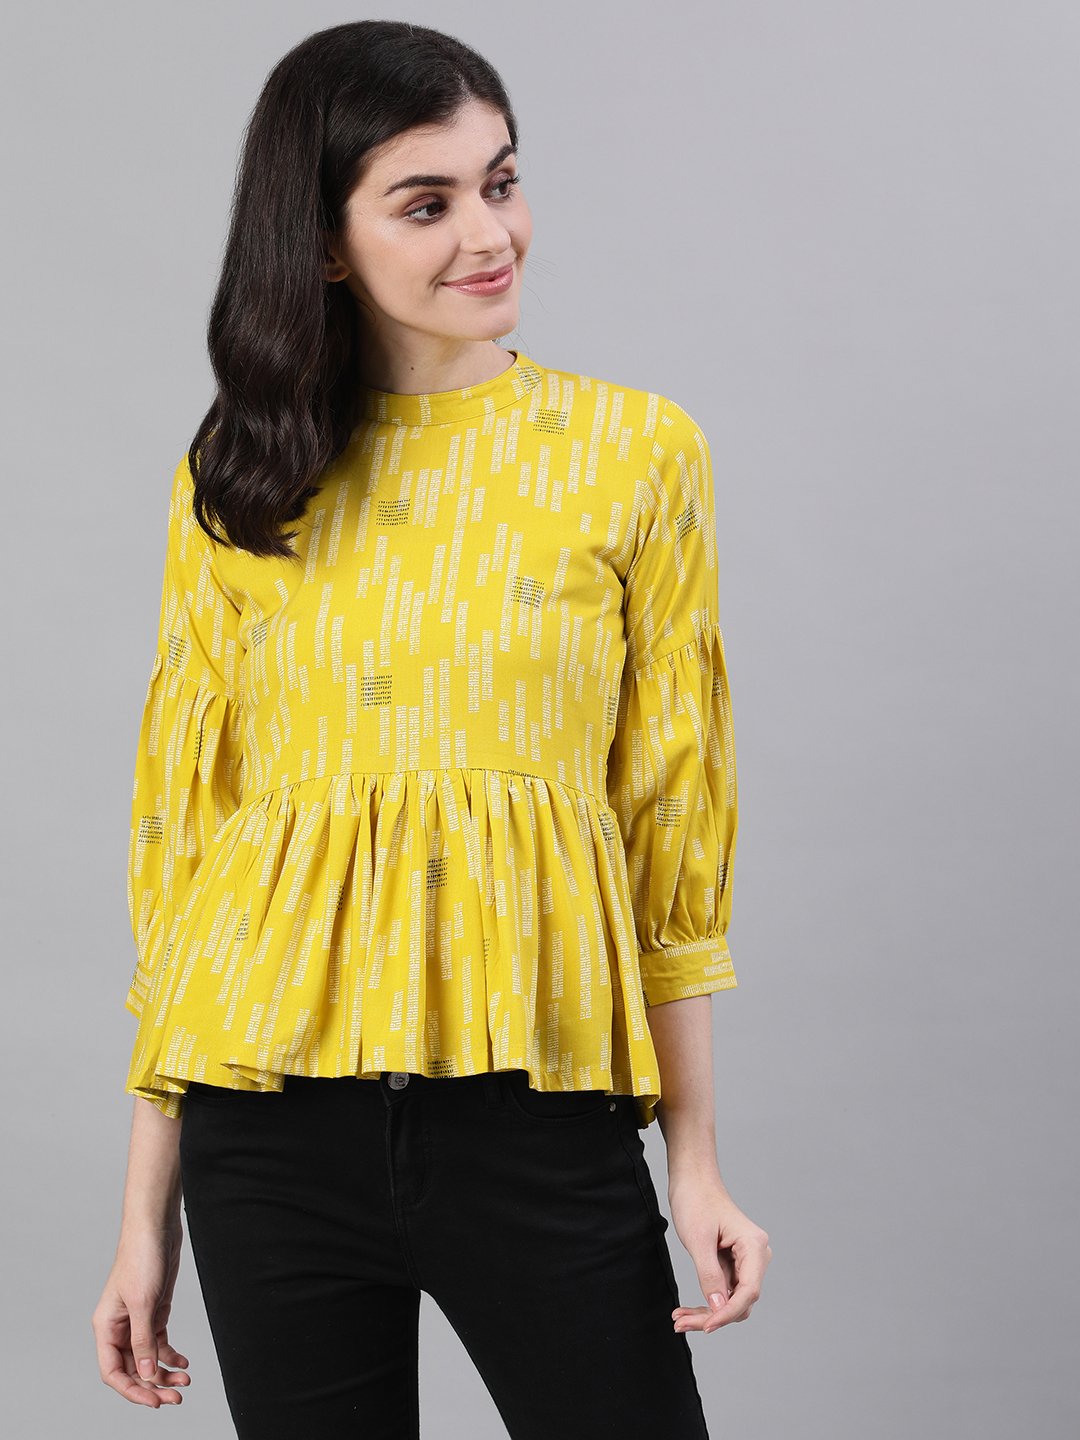 Women's Yellow Three-Quarter Sleeves Gathered Or Pleated Top - Nayo Clothing